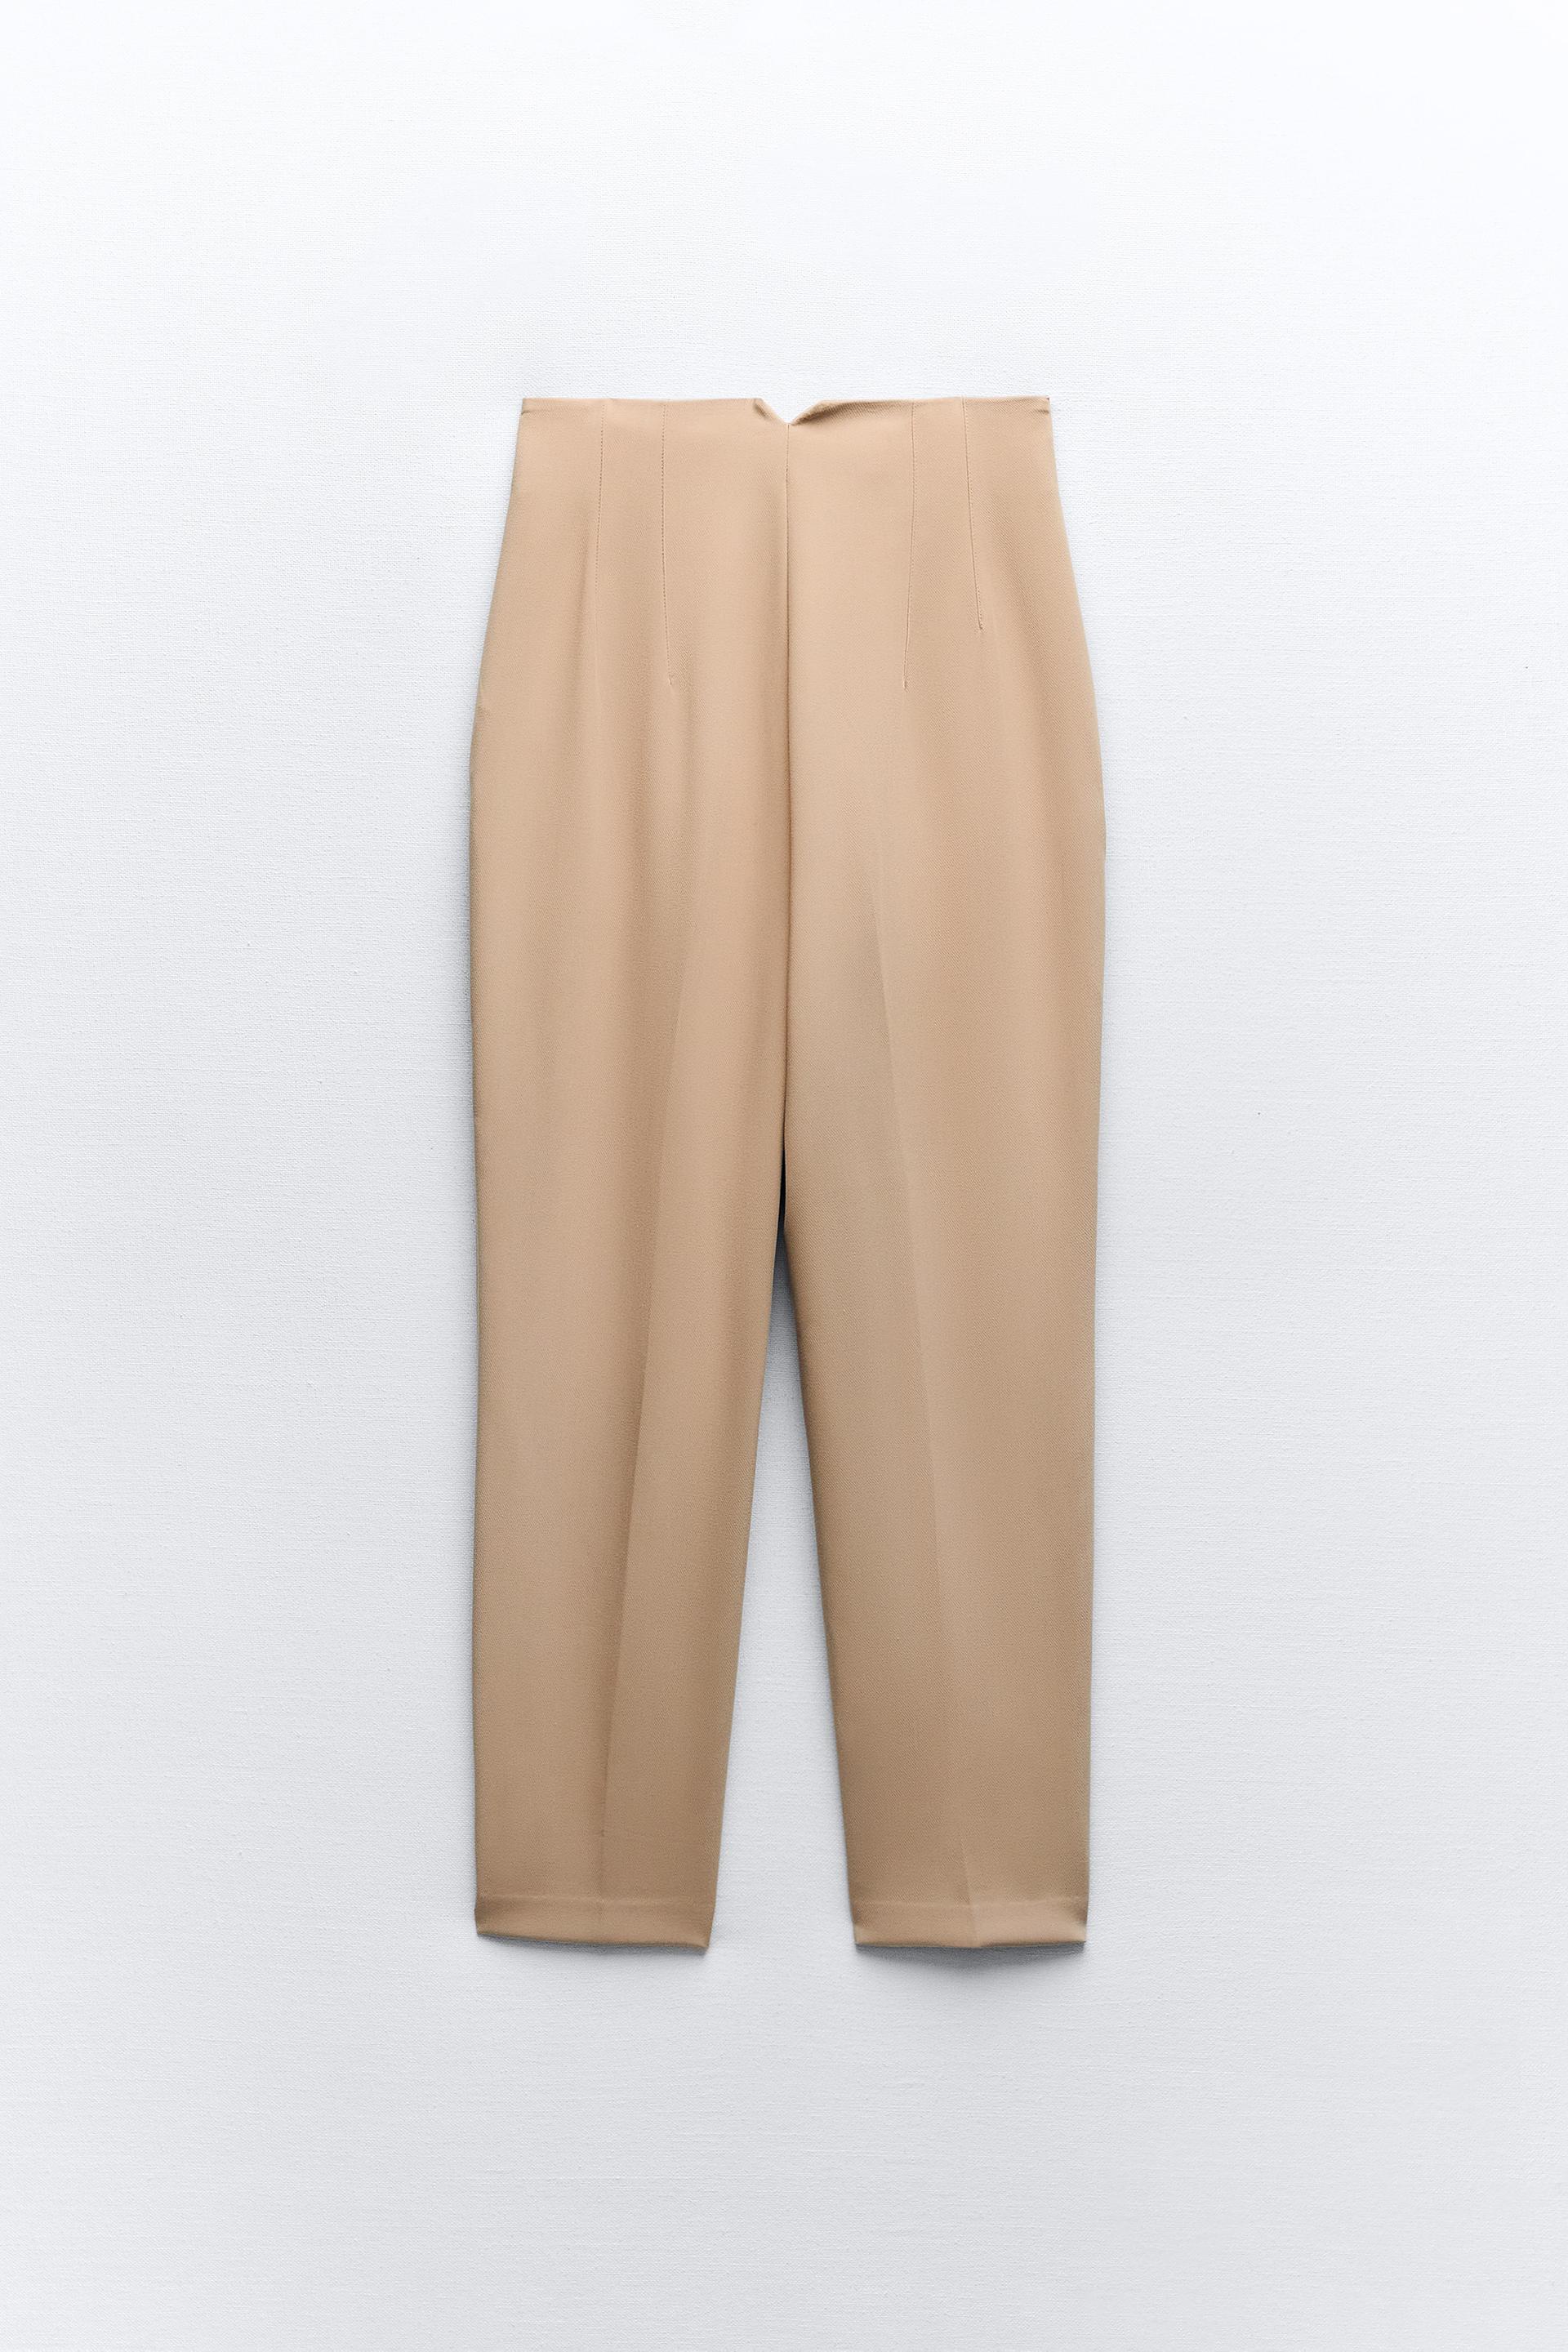 ZARA NEW WOMAN High-Waist Trousers With Belt Pant Coral Xs-Xl 4387/130  $53.92 - PicClick